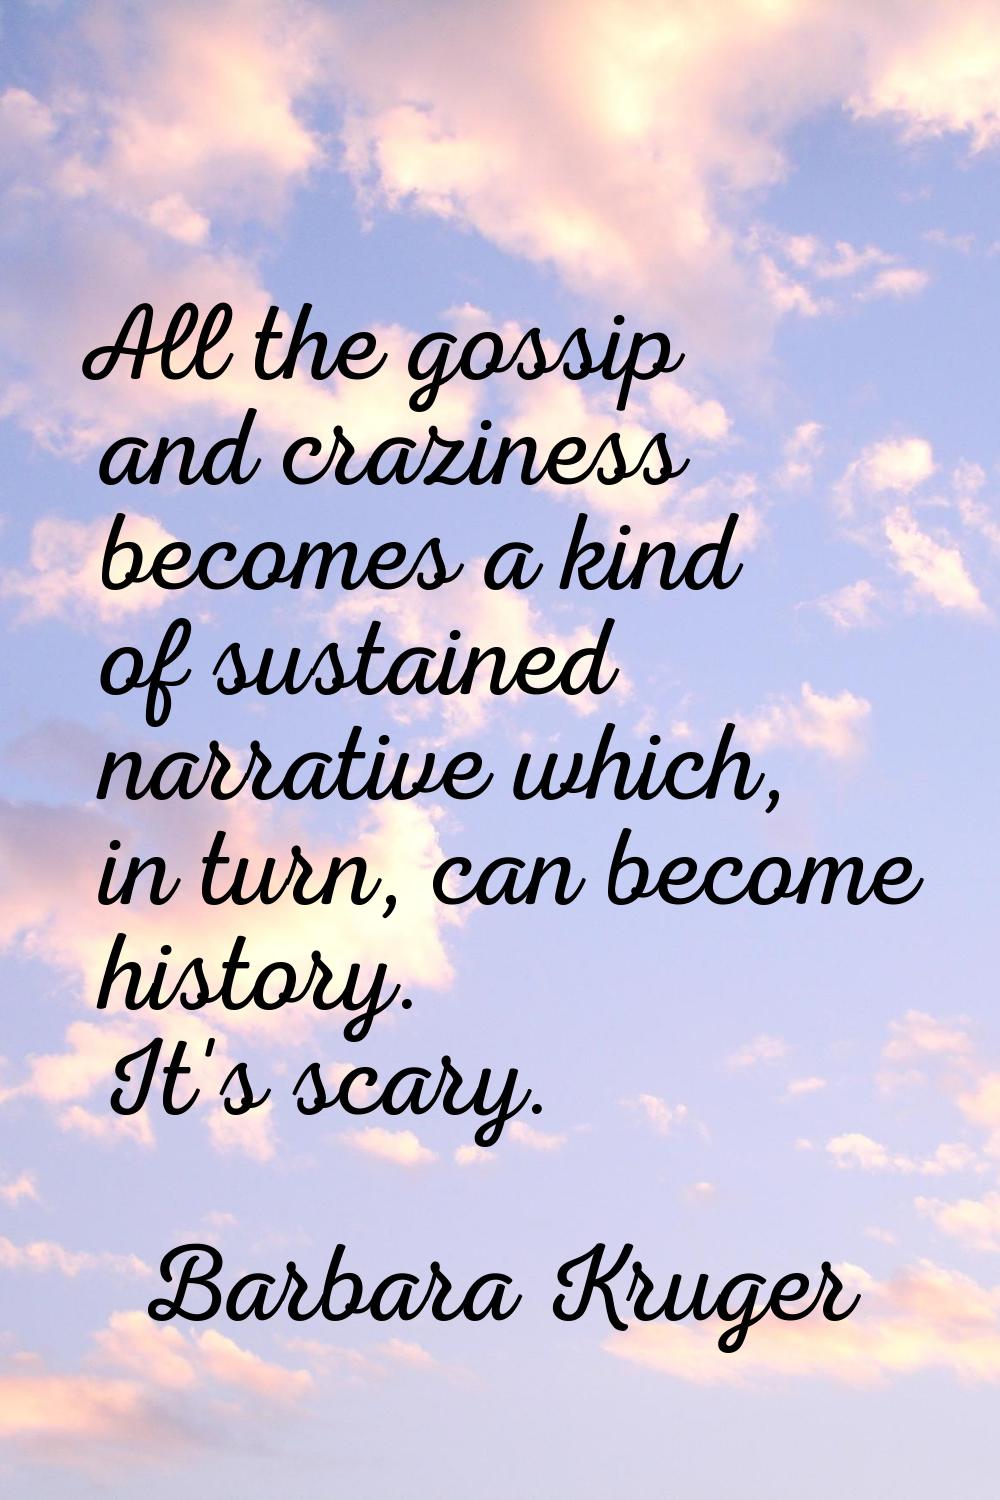 All the gossip and craziness becomes a kind of sustained narrative which, in turn, can become histo